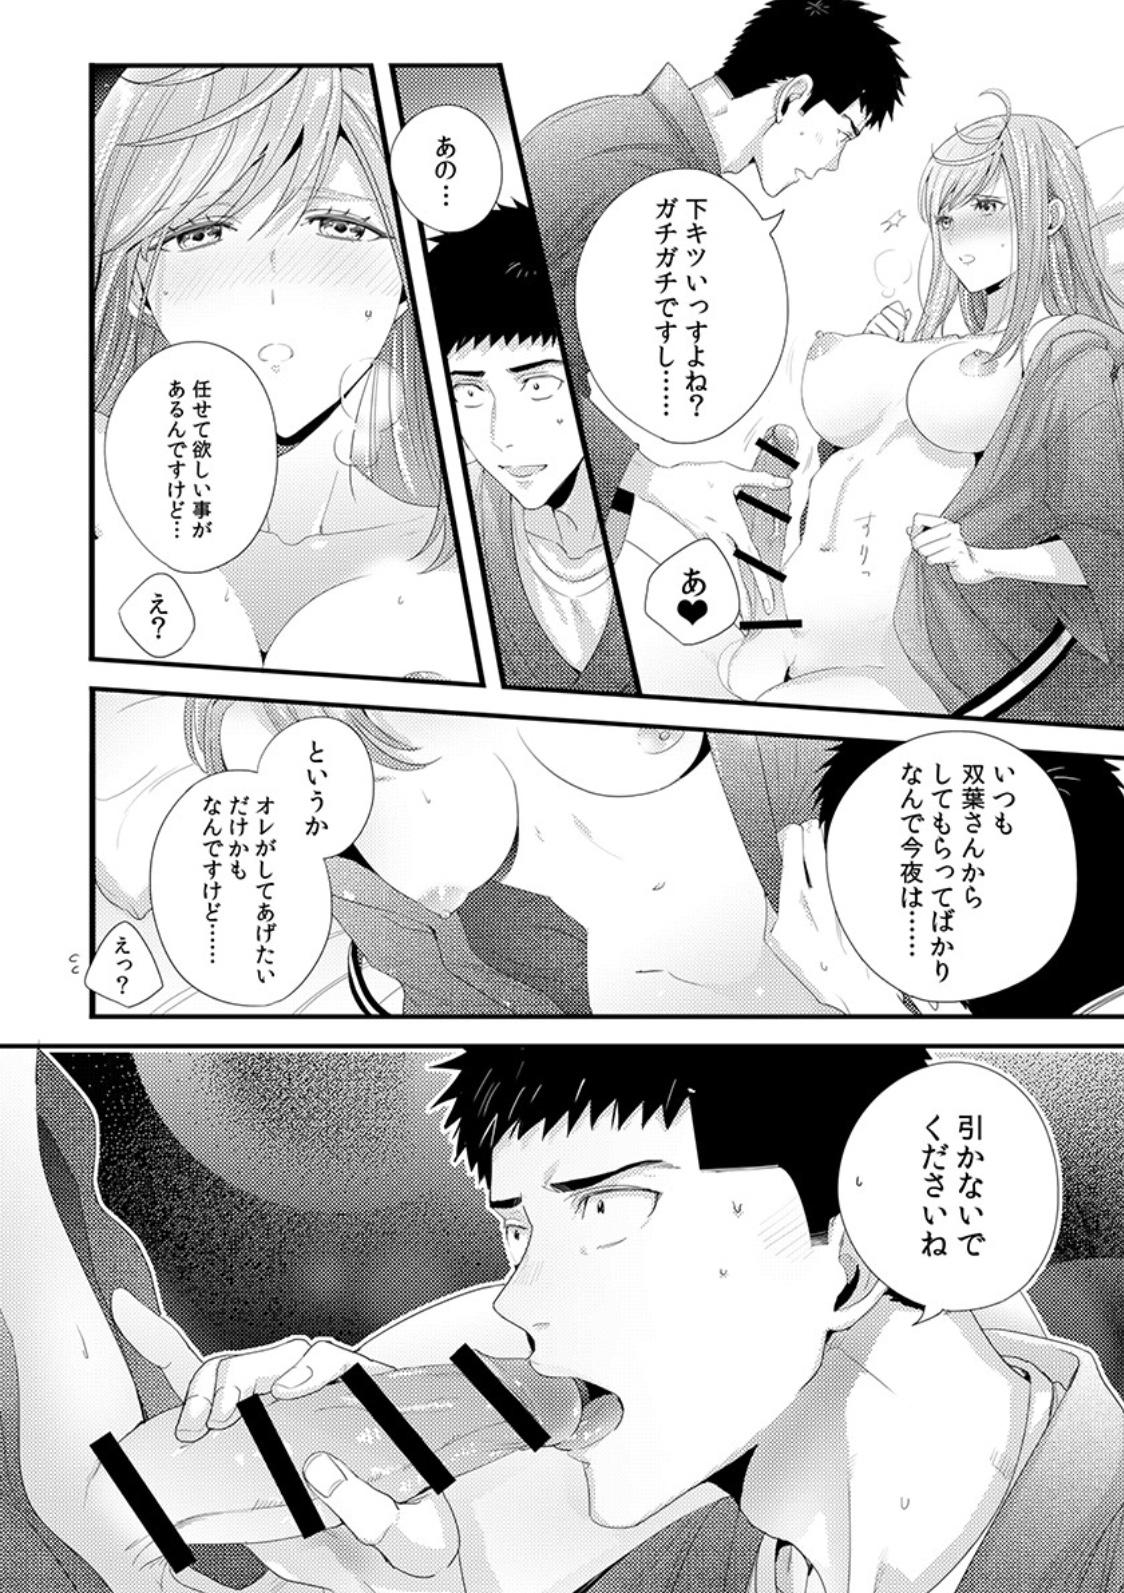 Please Let Me Hold You Futaba-San! Ch. 1+2 19